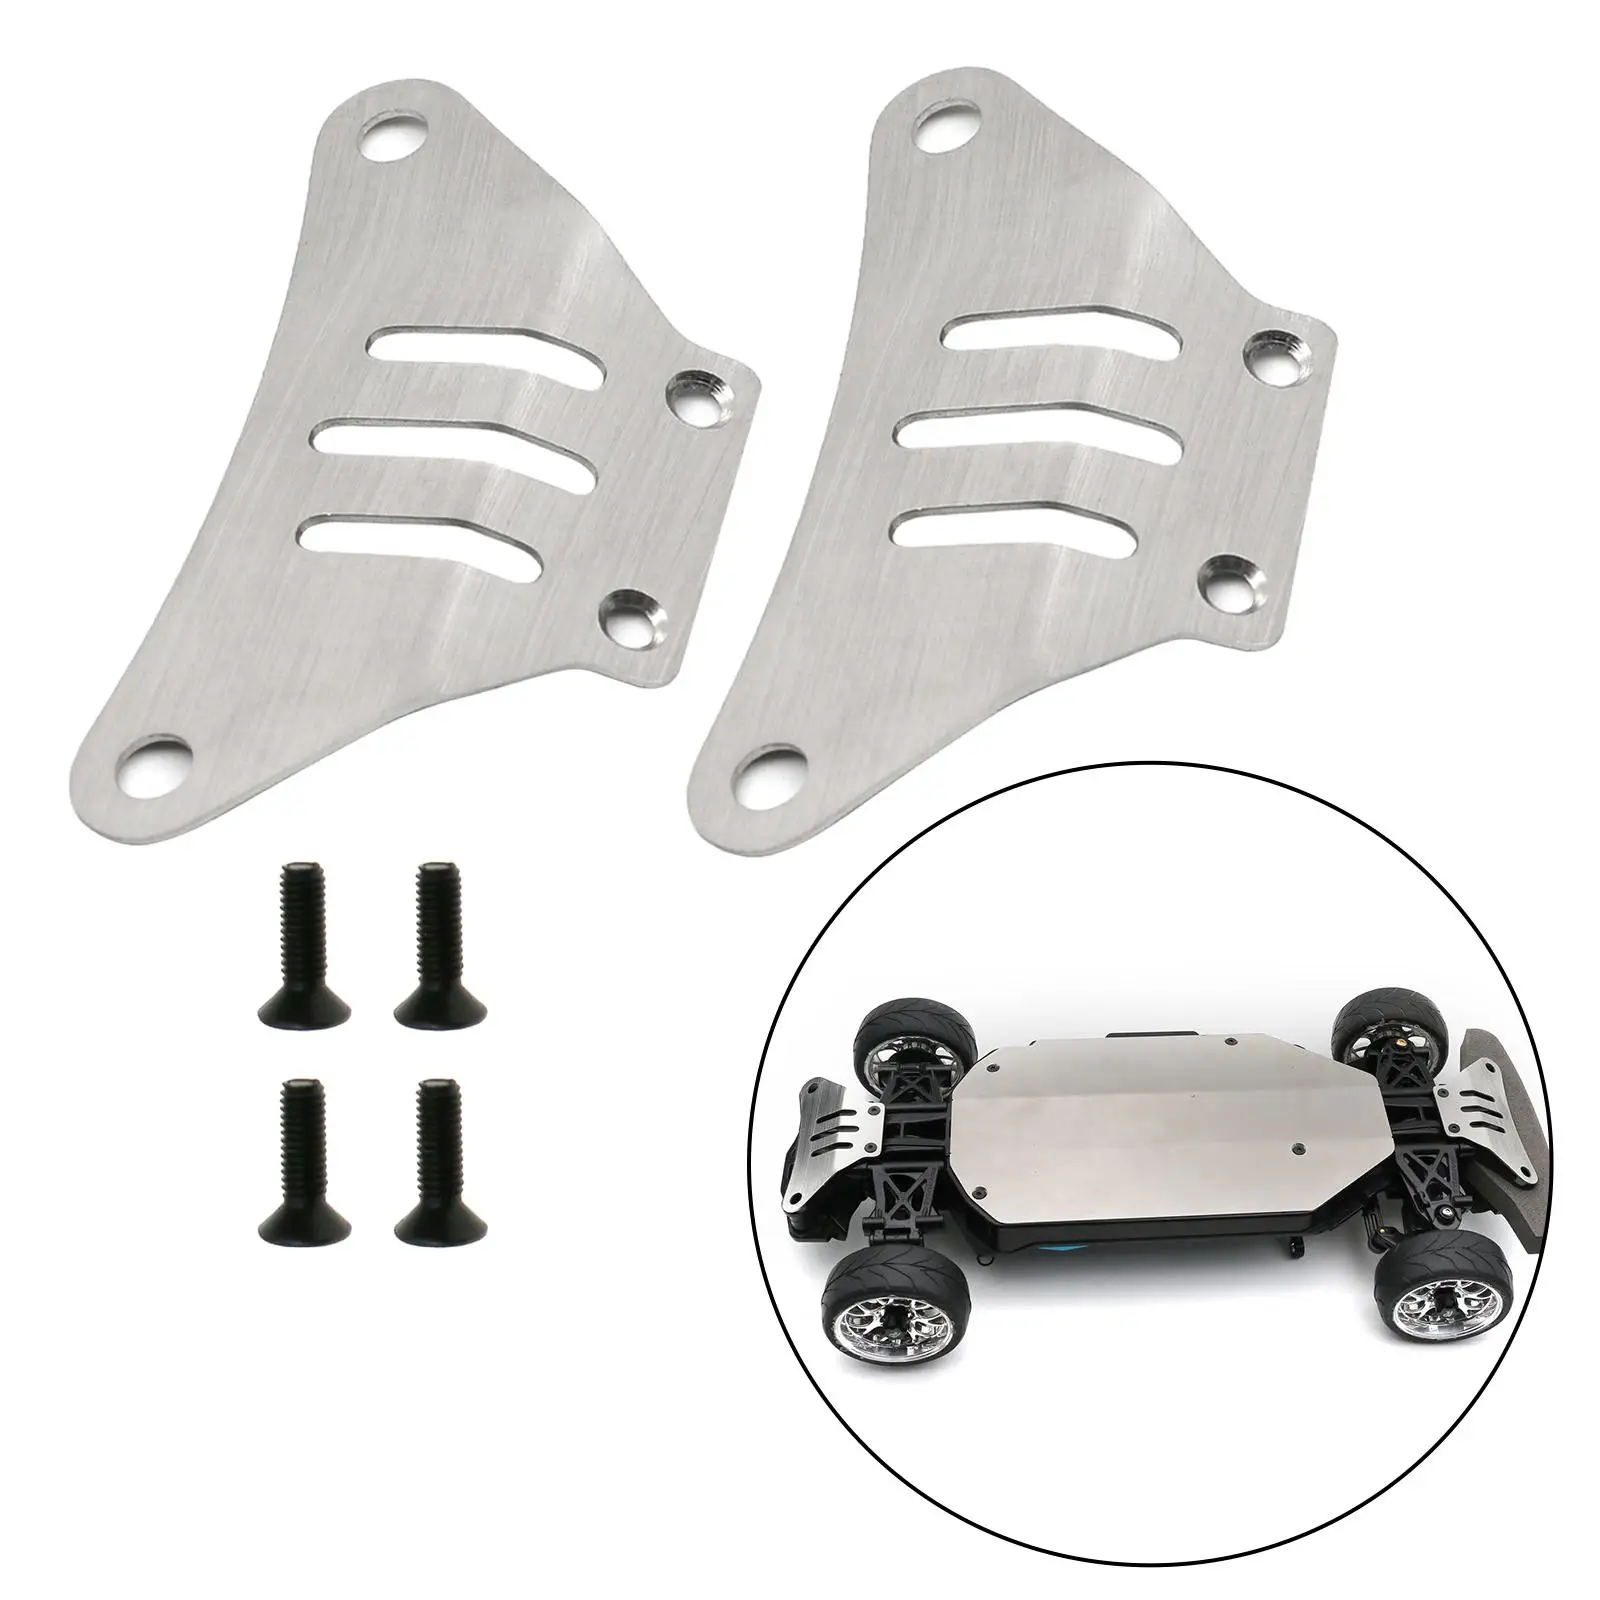 Stainless Steel Front and Rear Guard Boards Upgrade Metal Armor for 1/10 TT02 1:10 Scale RC Car DIY Accessories Replaces Part